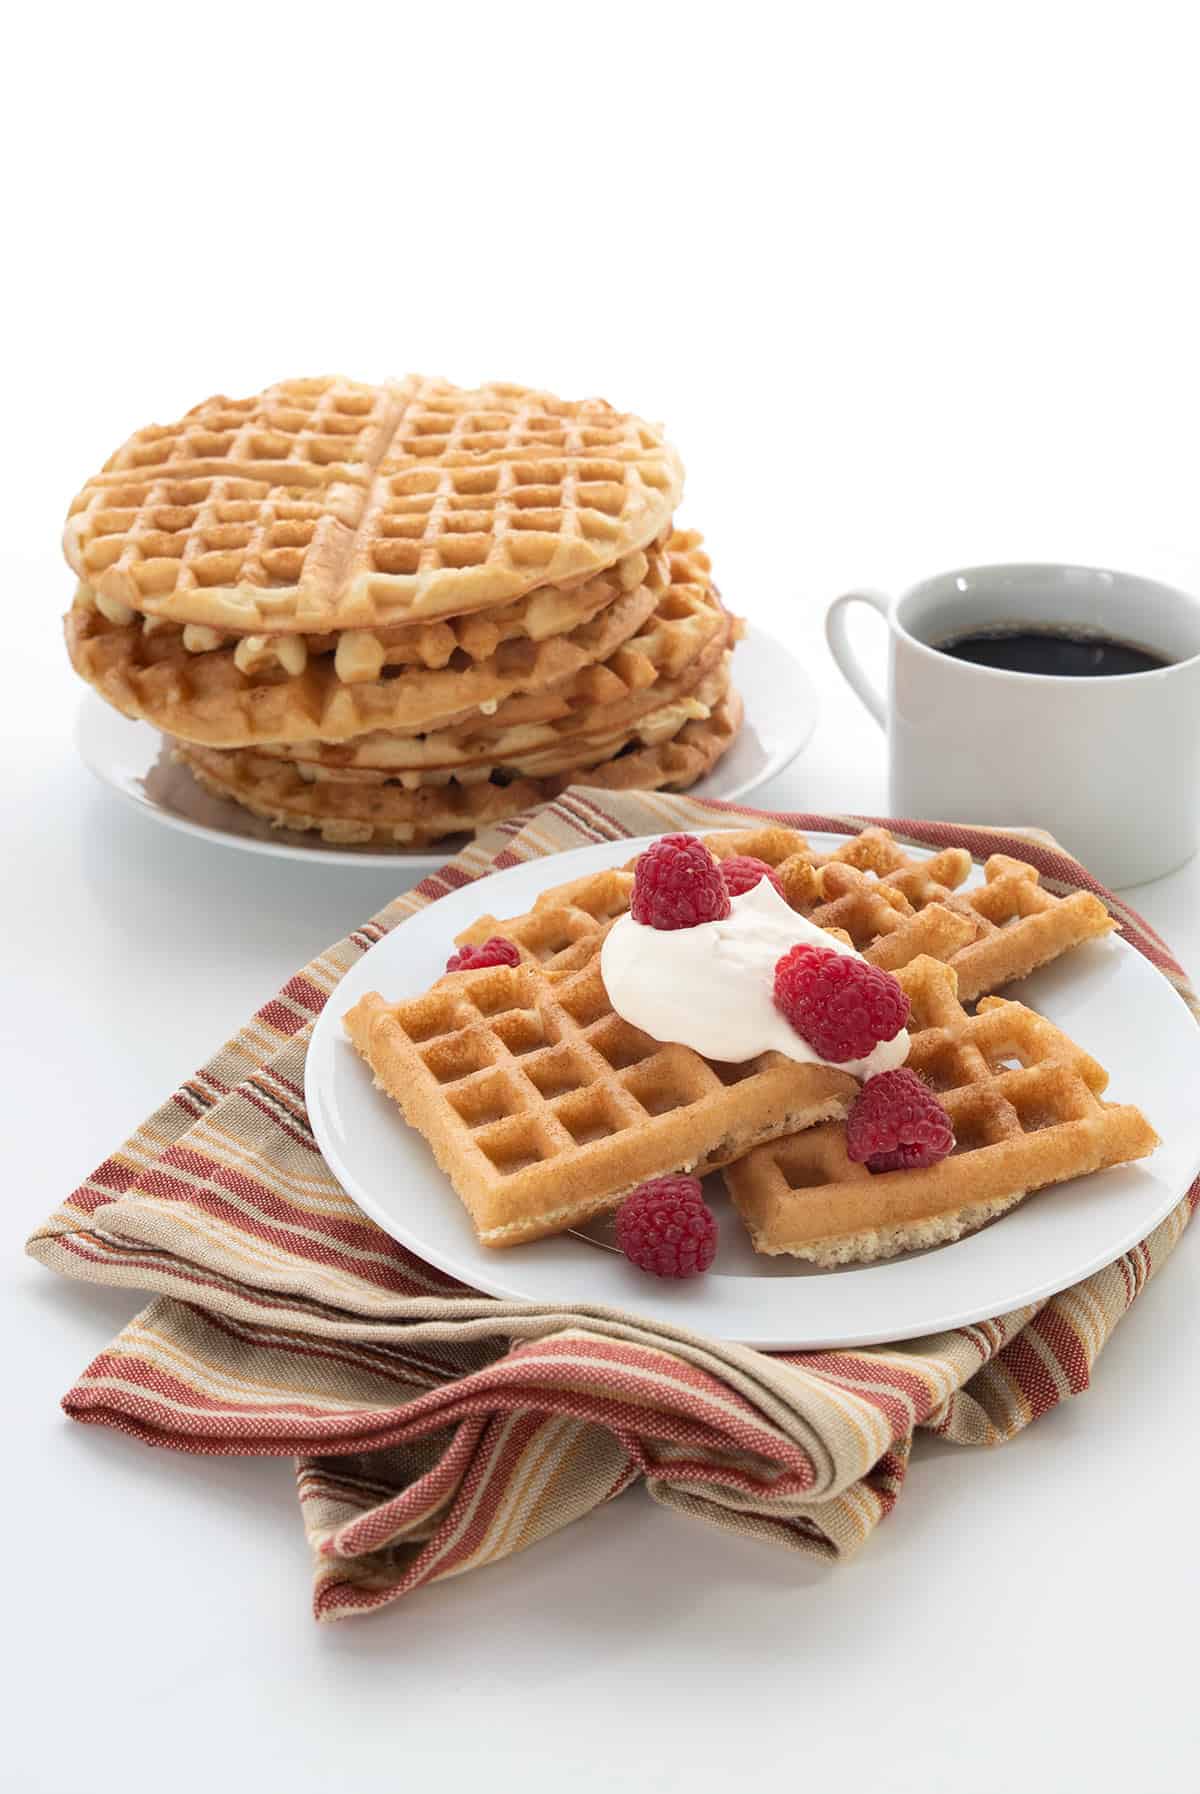 Keto waffles on a white plate over a striped tan and red napkin. A stack of waffles and a cup of coffee in the background.